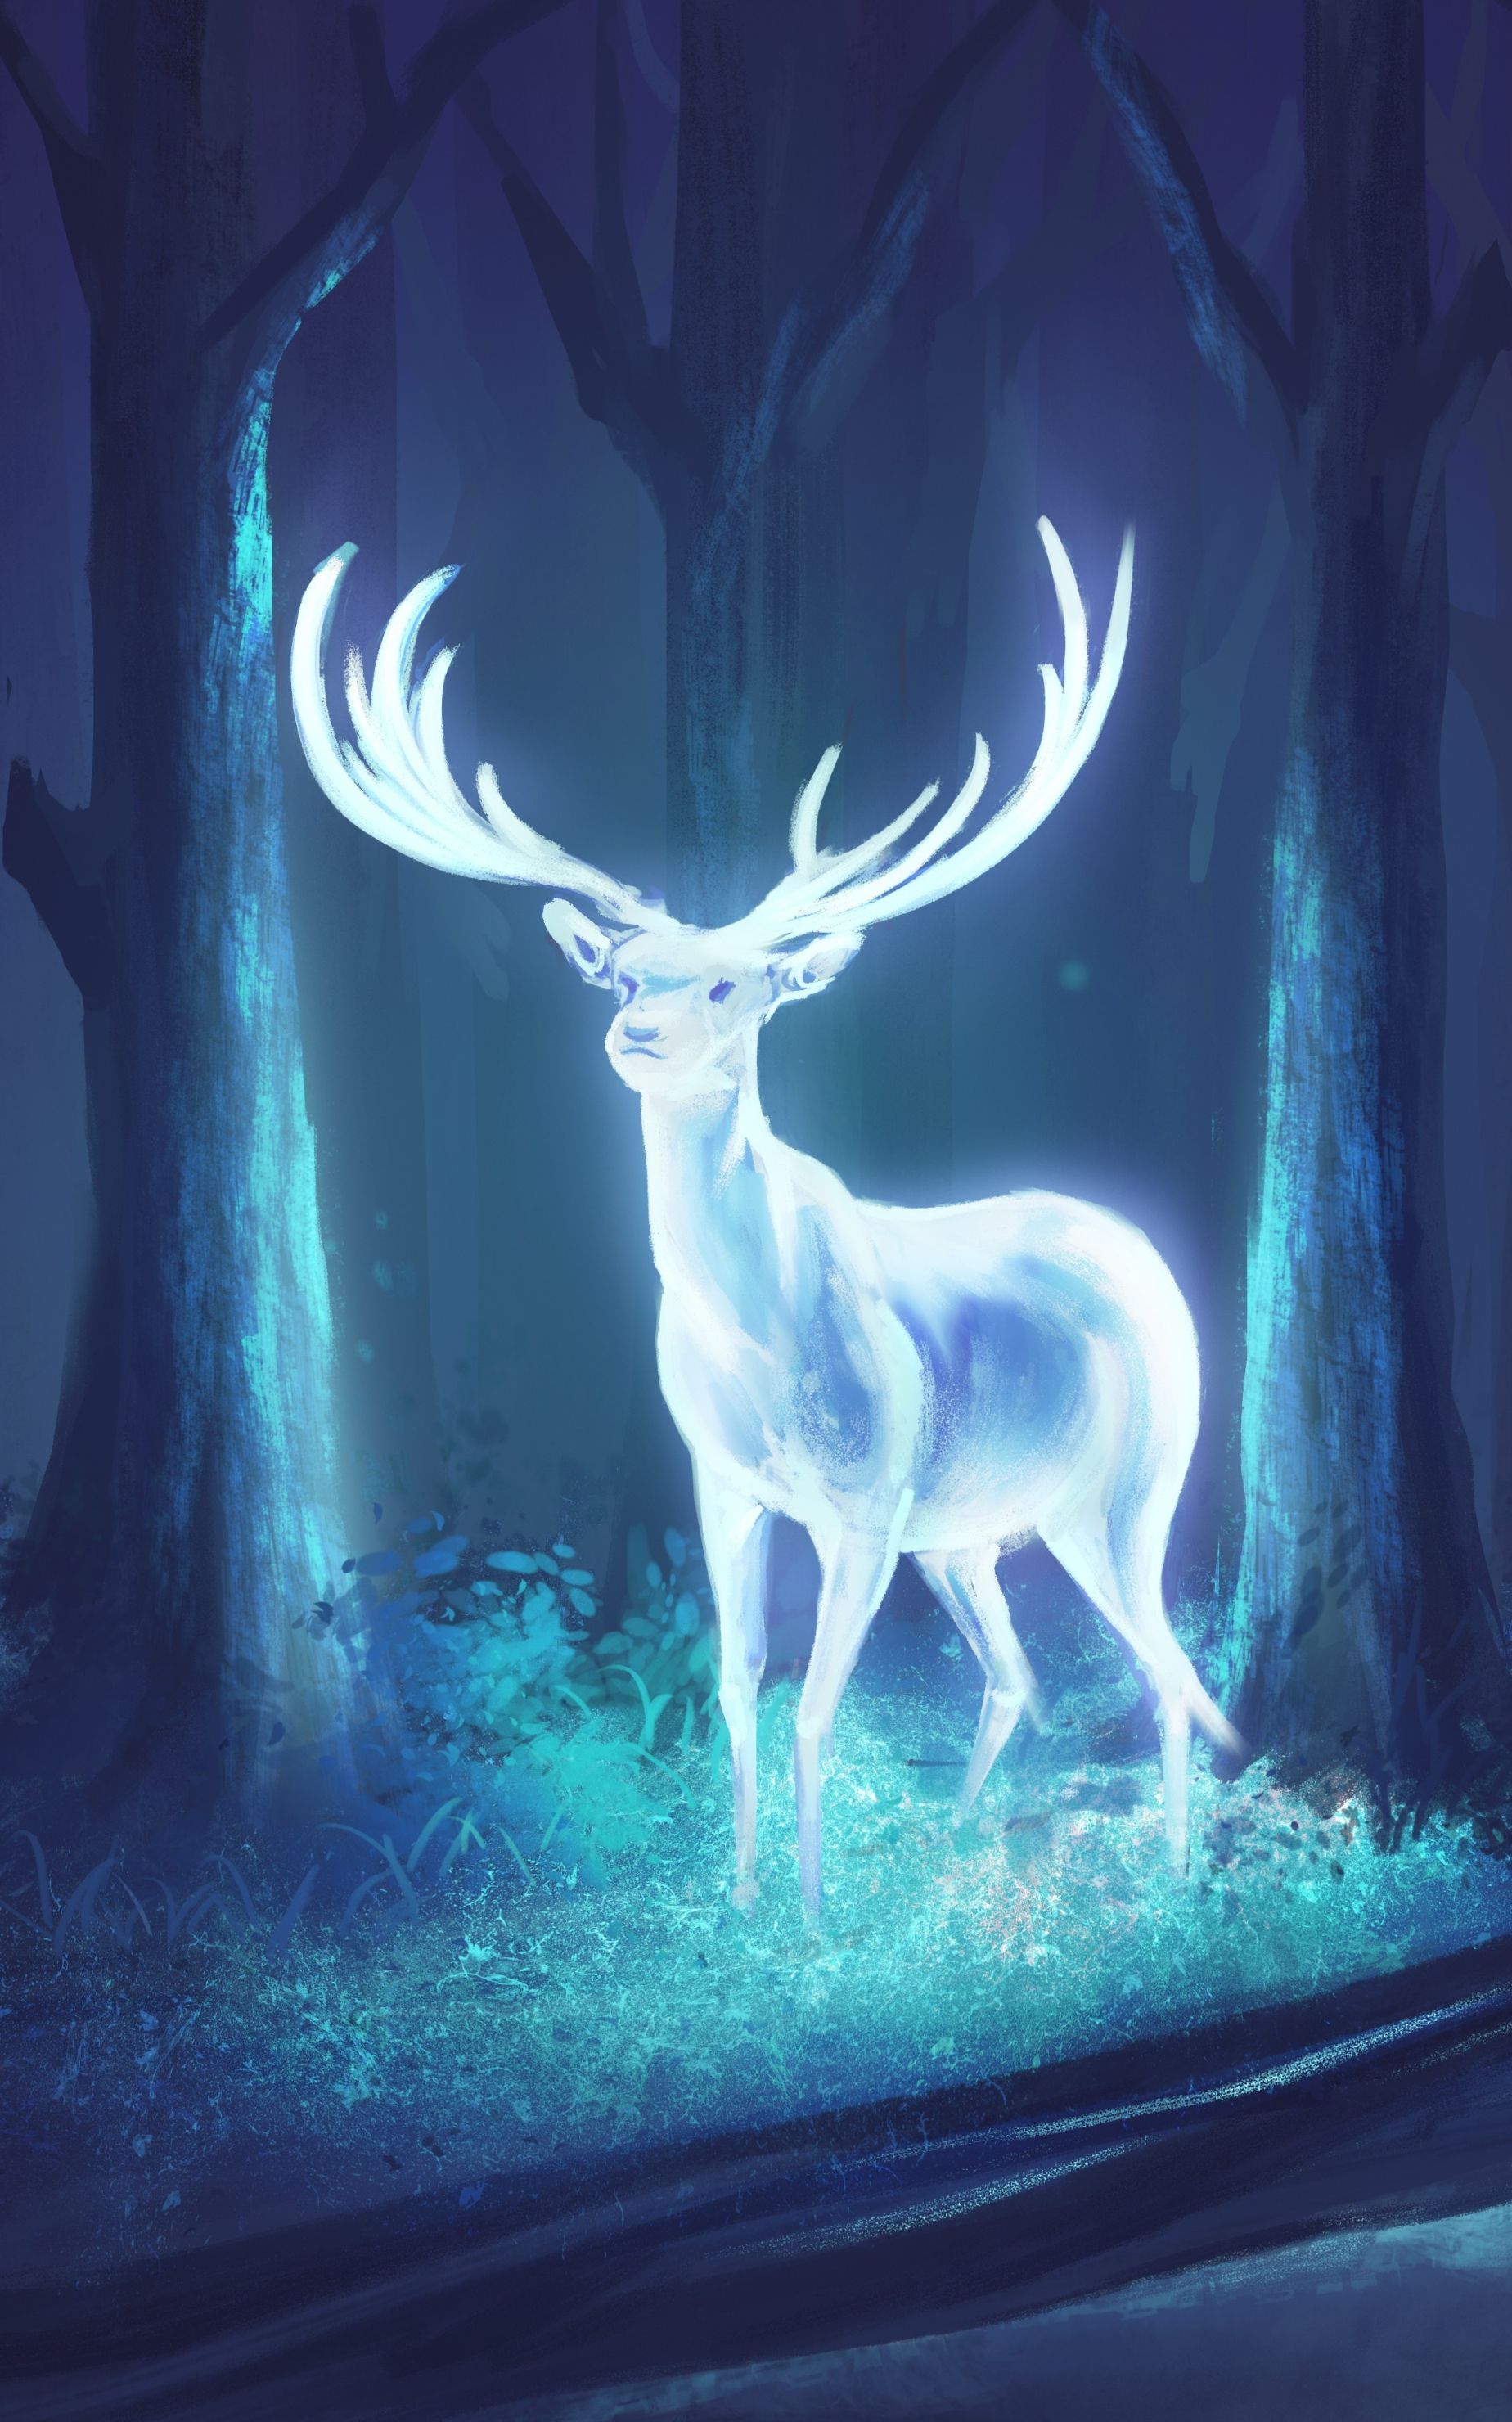 A white stag with antlers stands in a forest - Deer